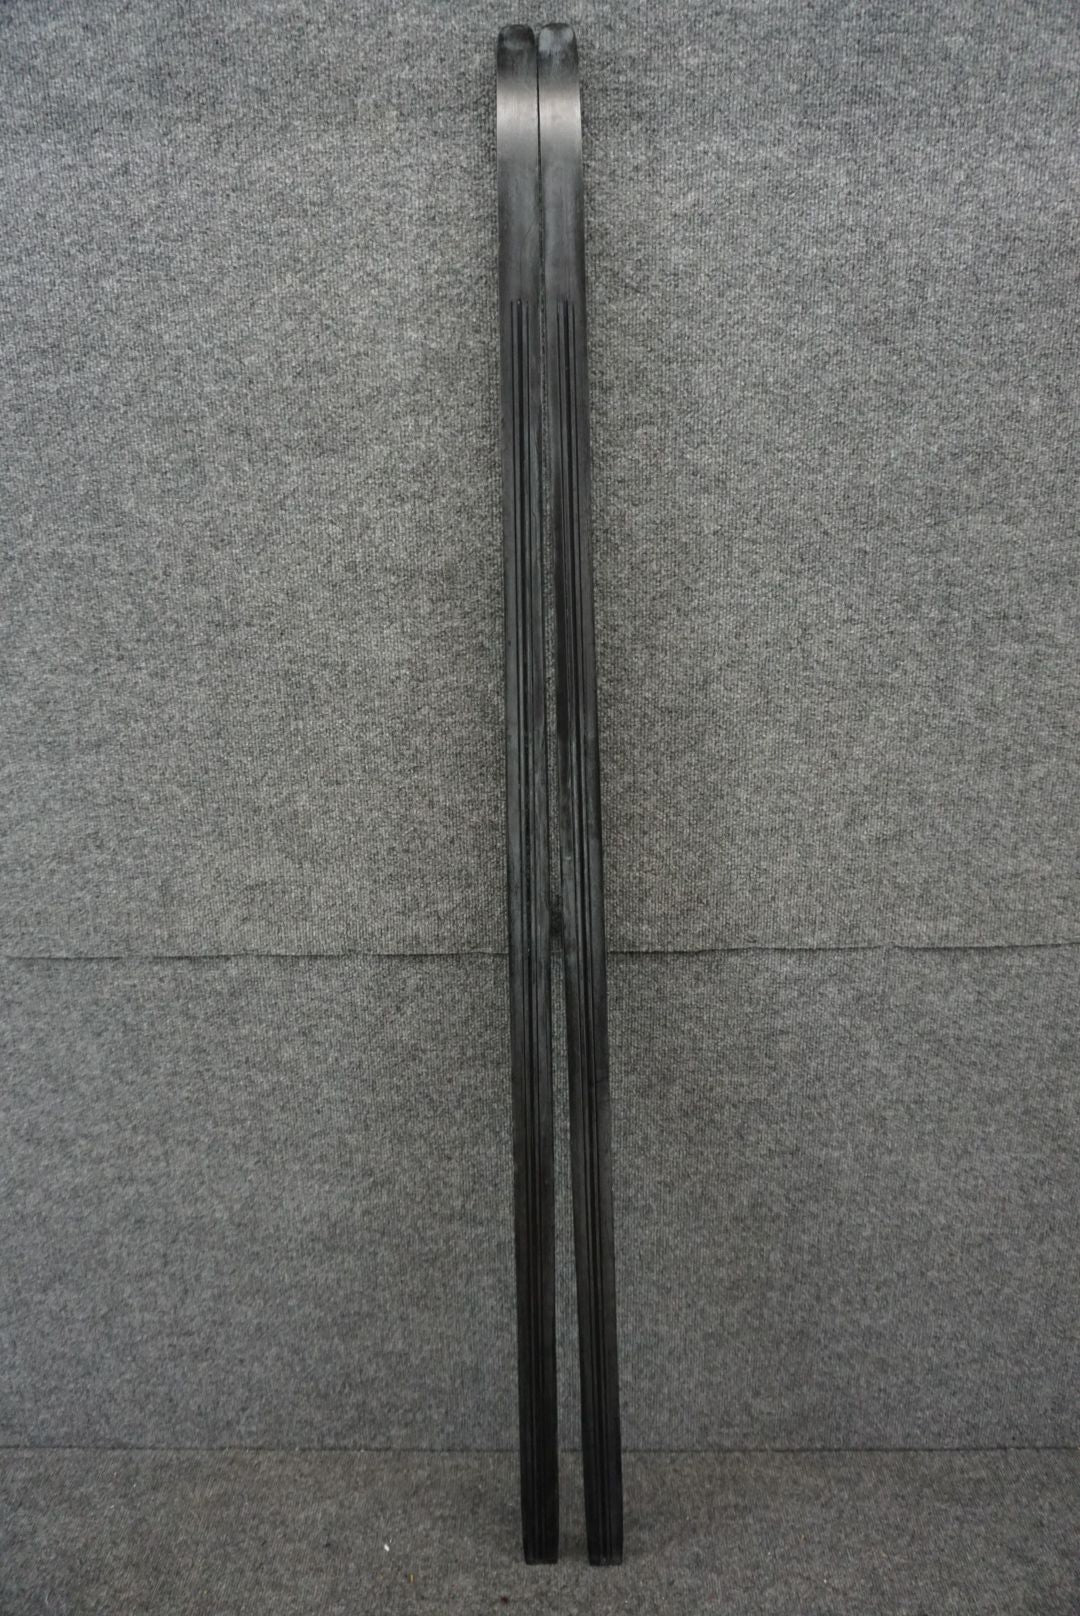 Fischer Length 171 cm/66.5" Cross Country Skis